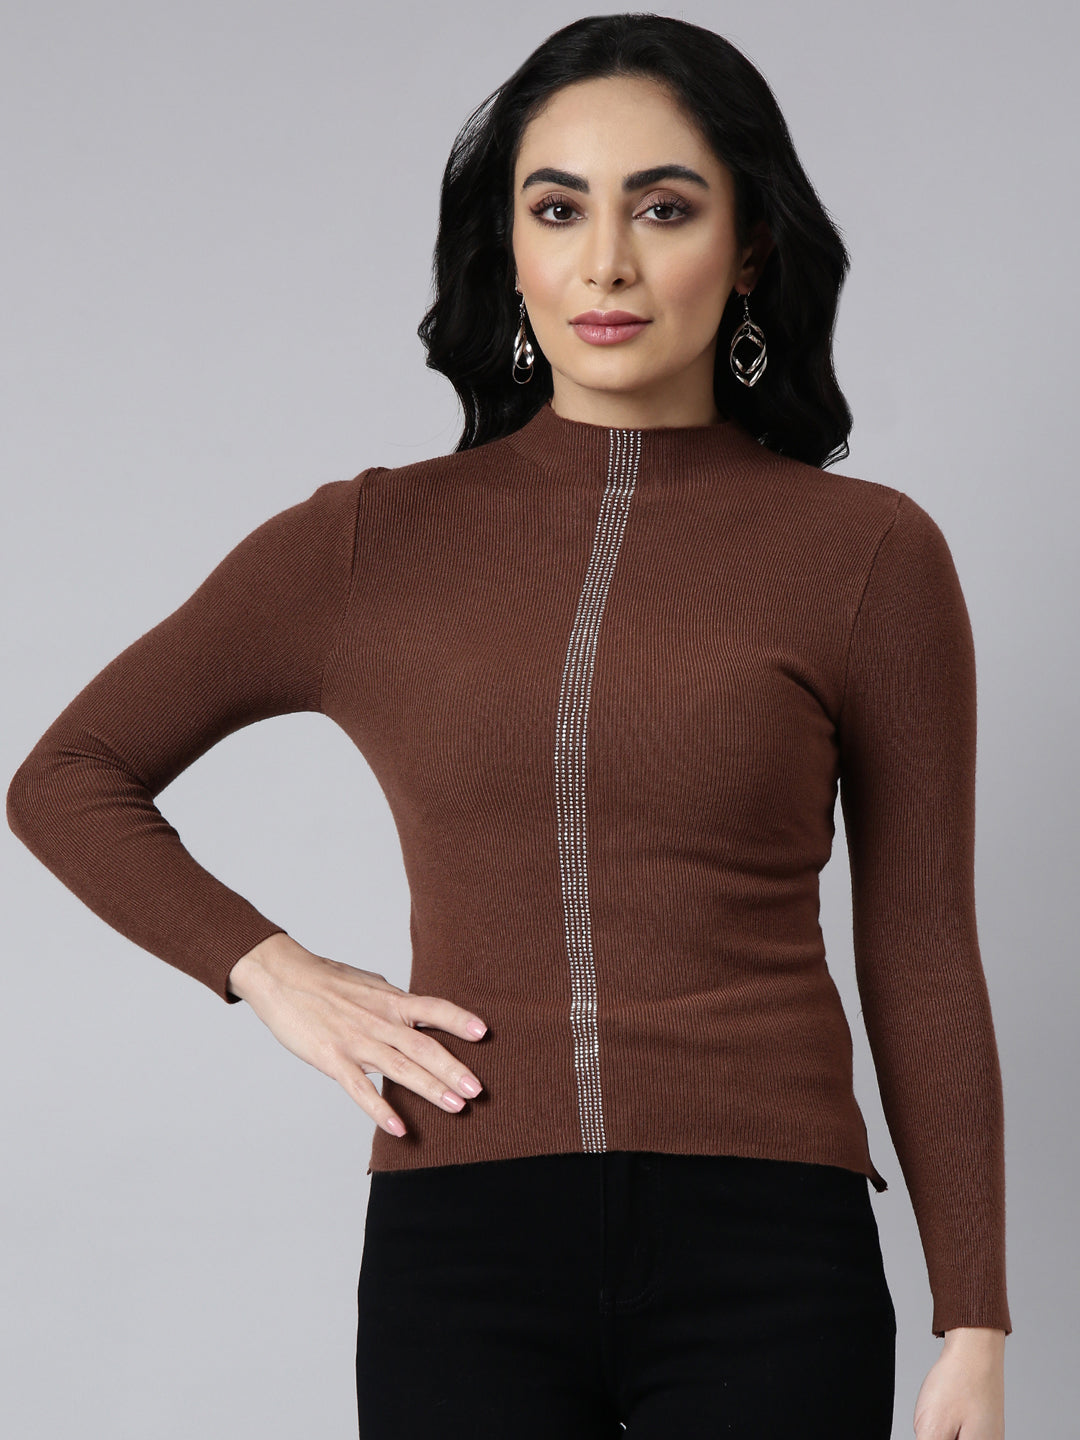 Women Solid Brown Fitted Top